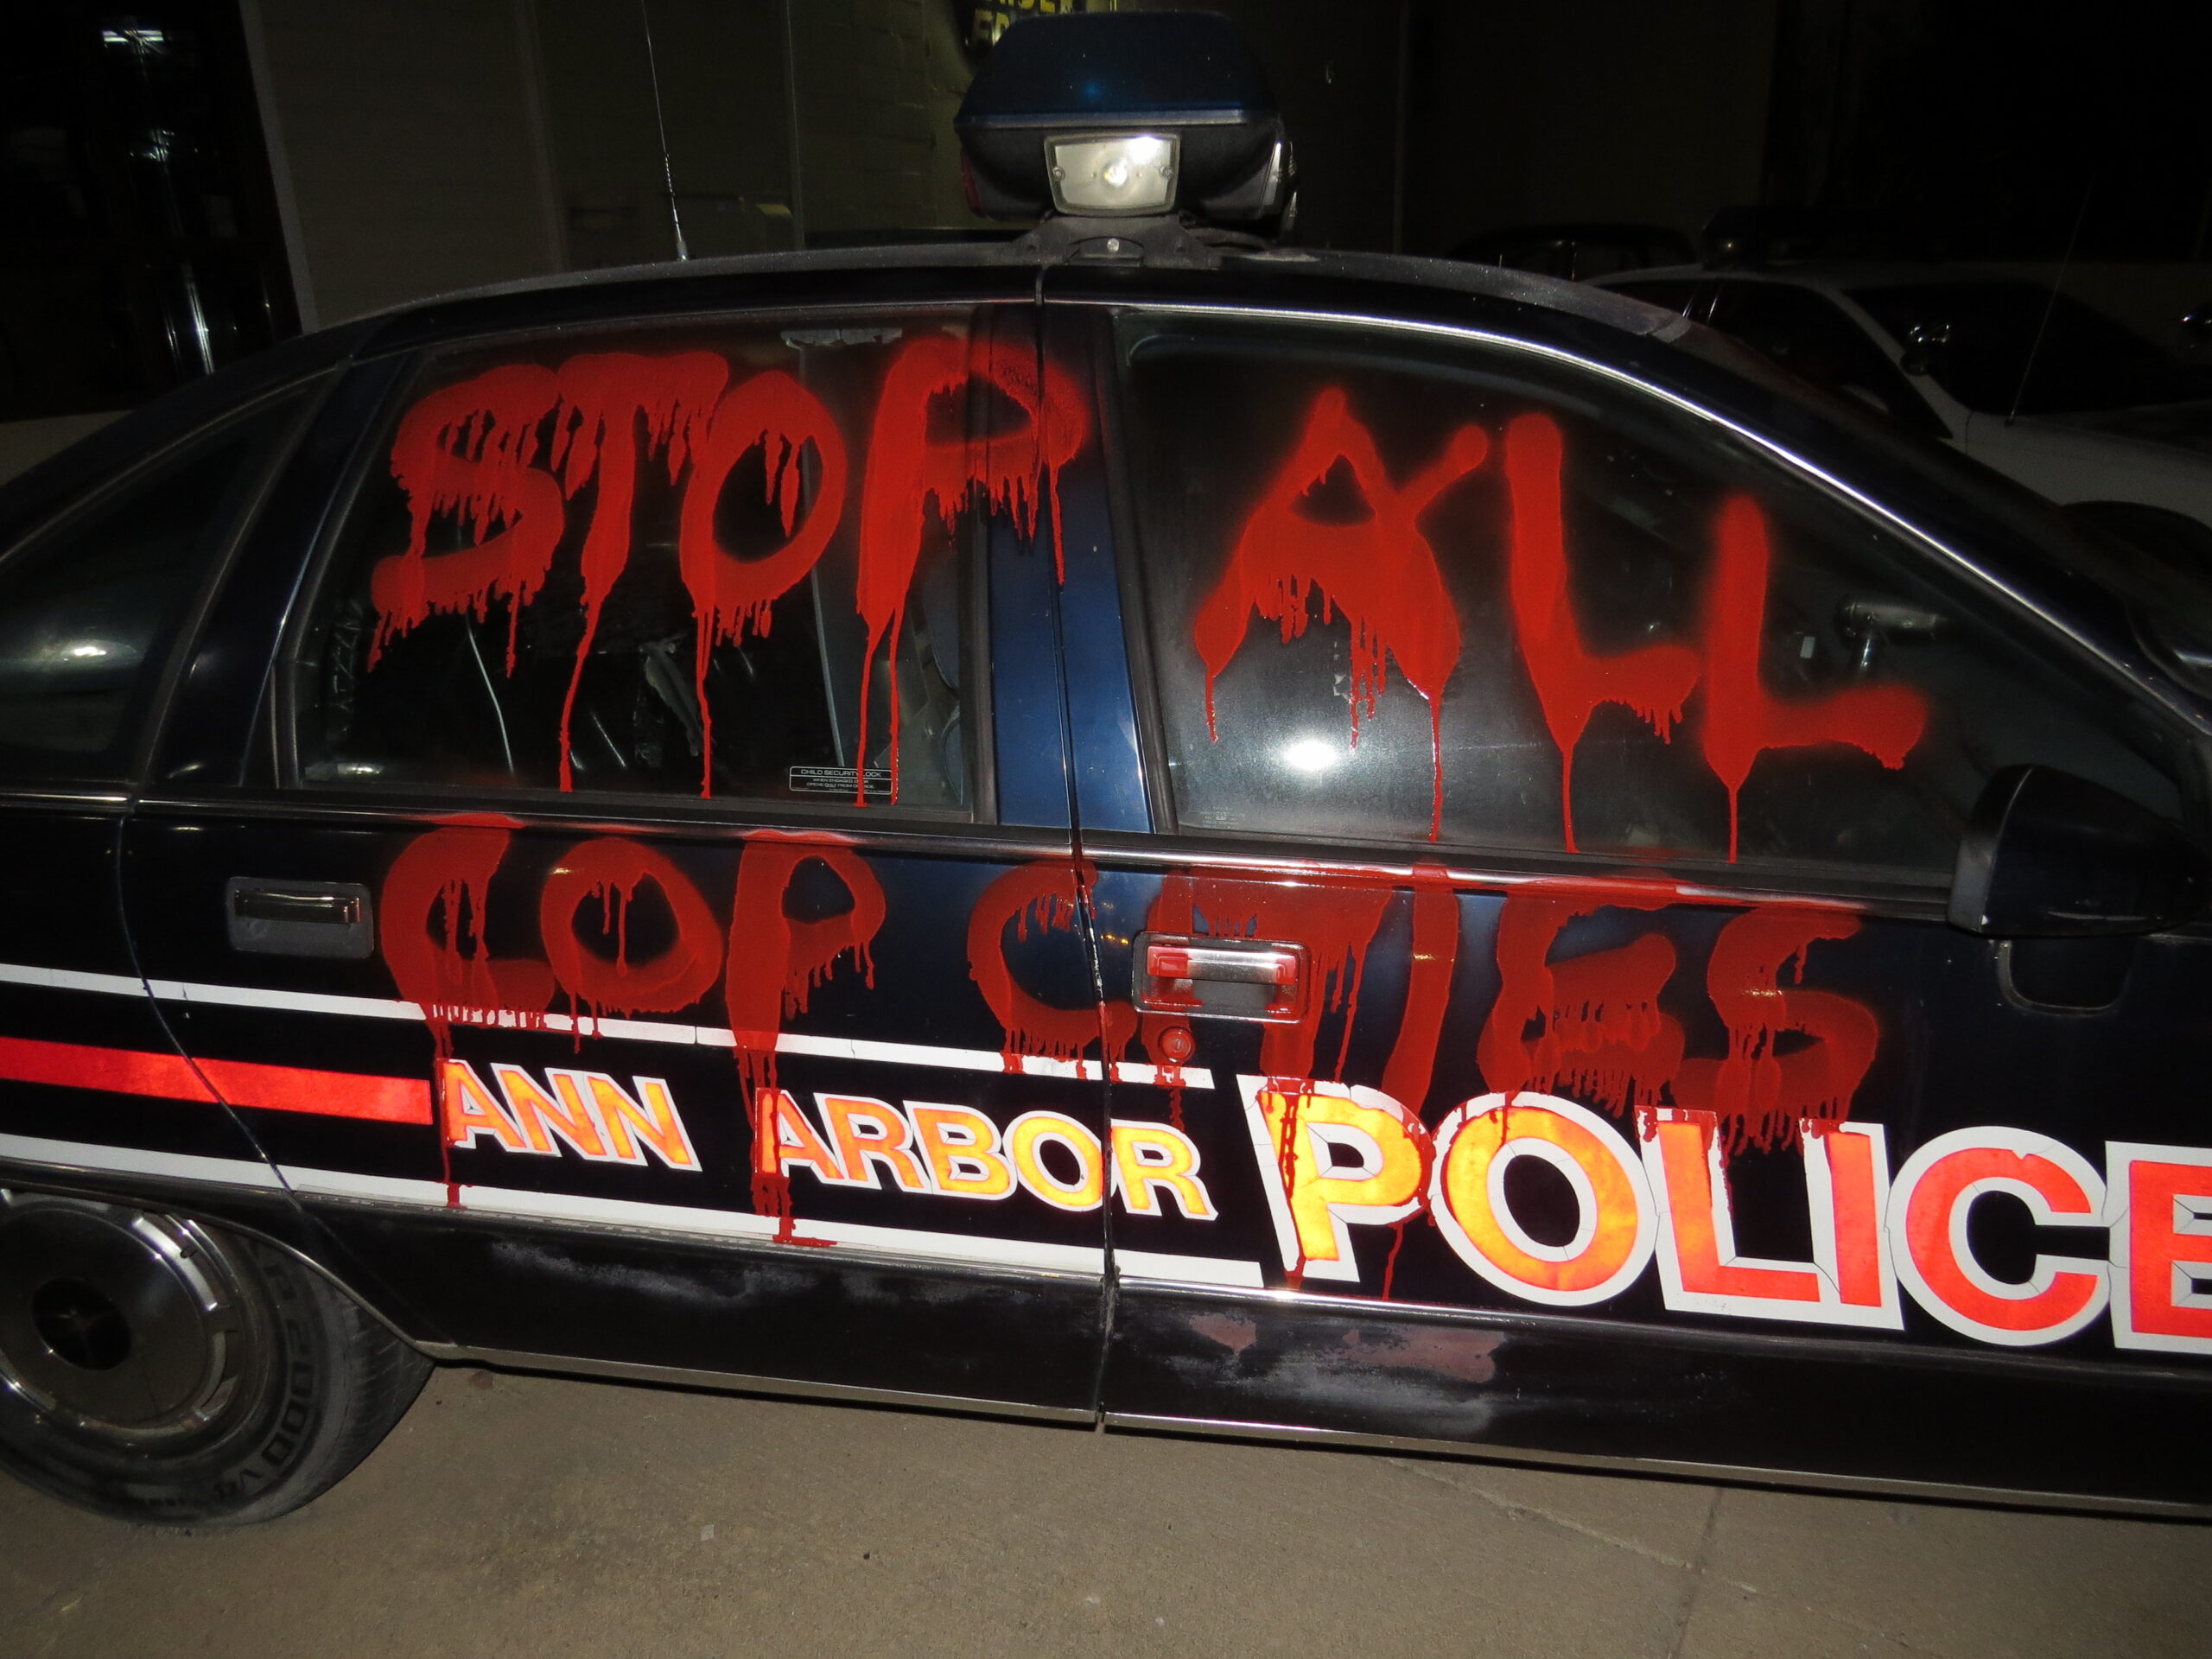 An Ann Arbor police car is spray painted "STOP ALL COP CITIES" on the side in red spray paint.